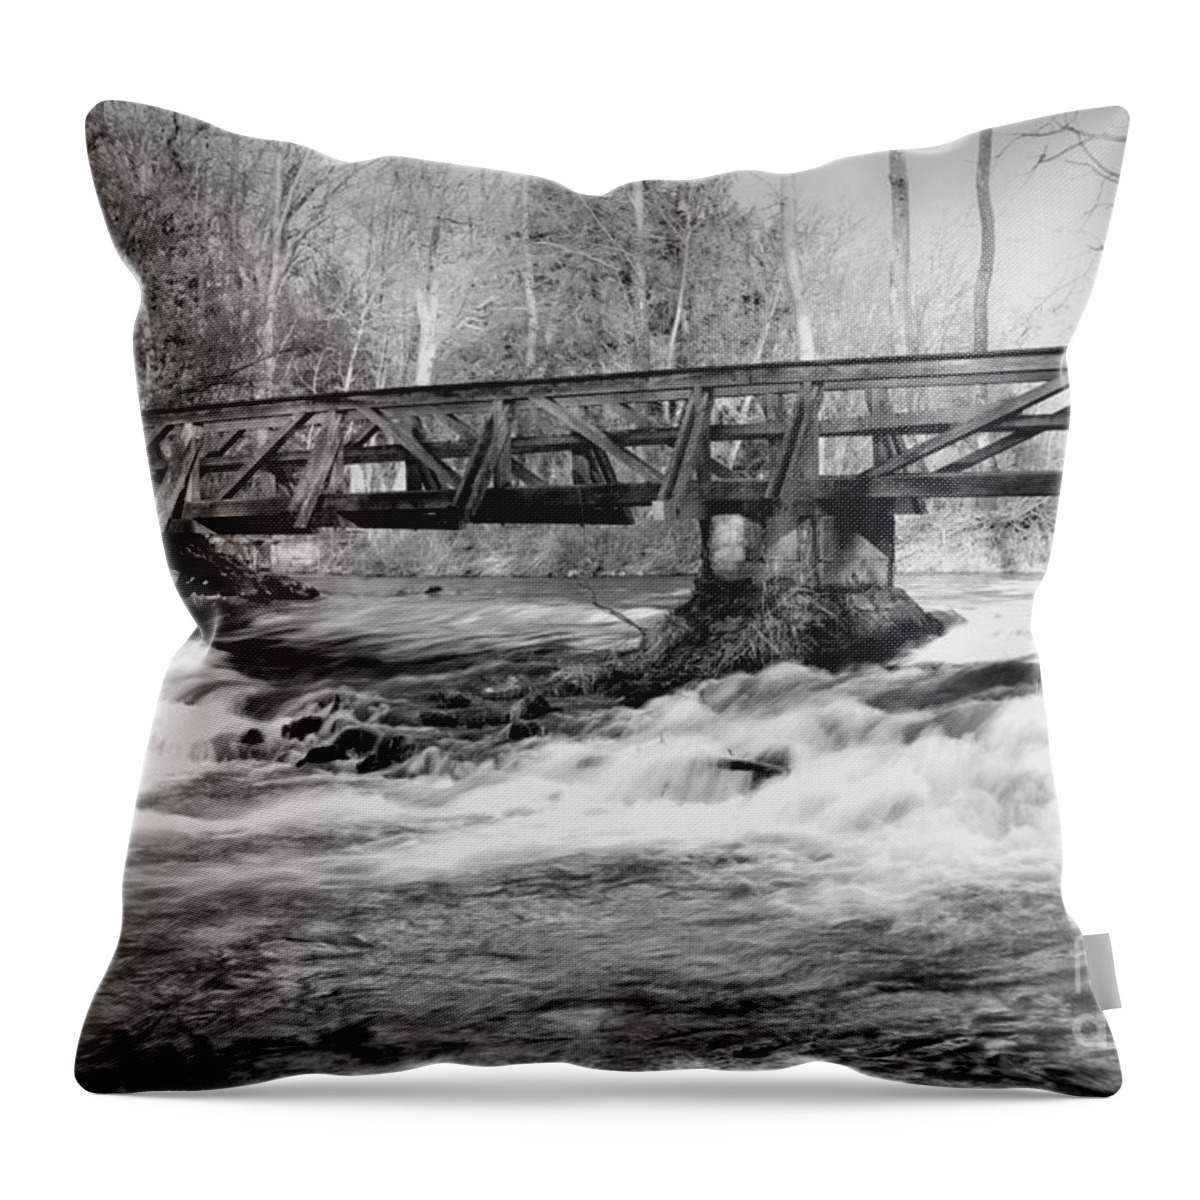 Amper Throw Pillow featuring the photograph Bridge Over Troubled Water by Hannes Cmarits